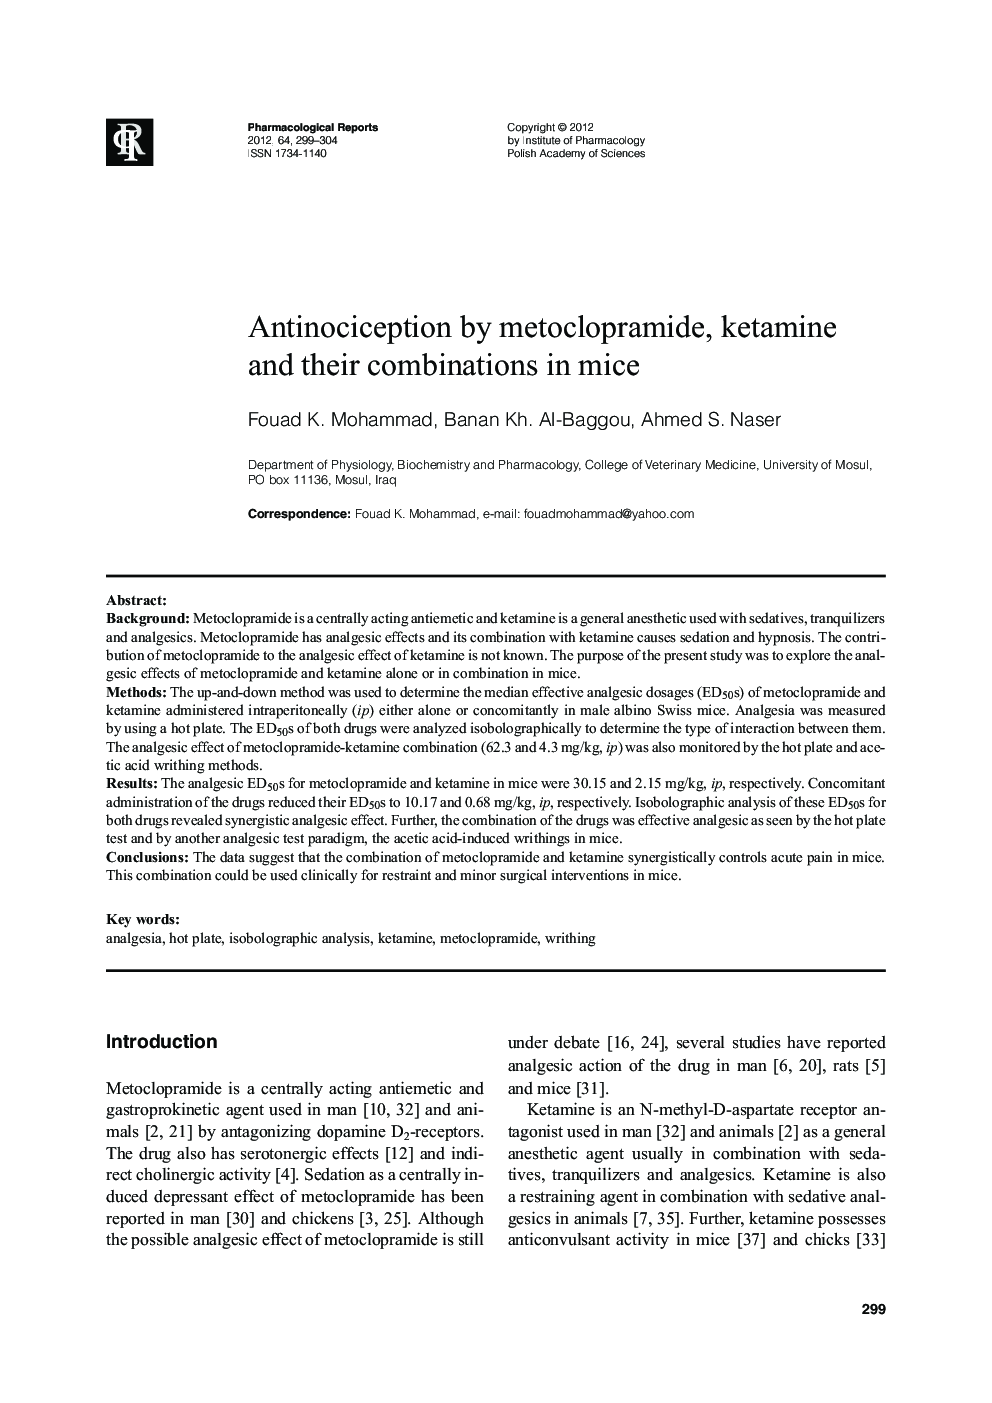 Antinociception by metoclopramide, ketamine and their combinations in mice